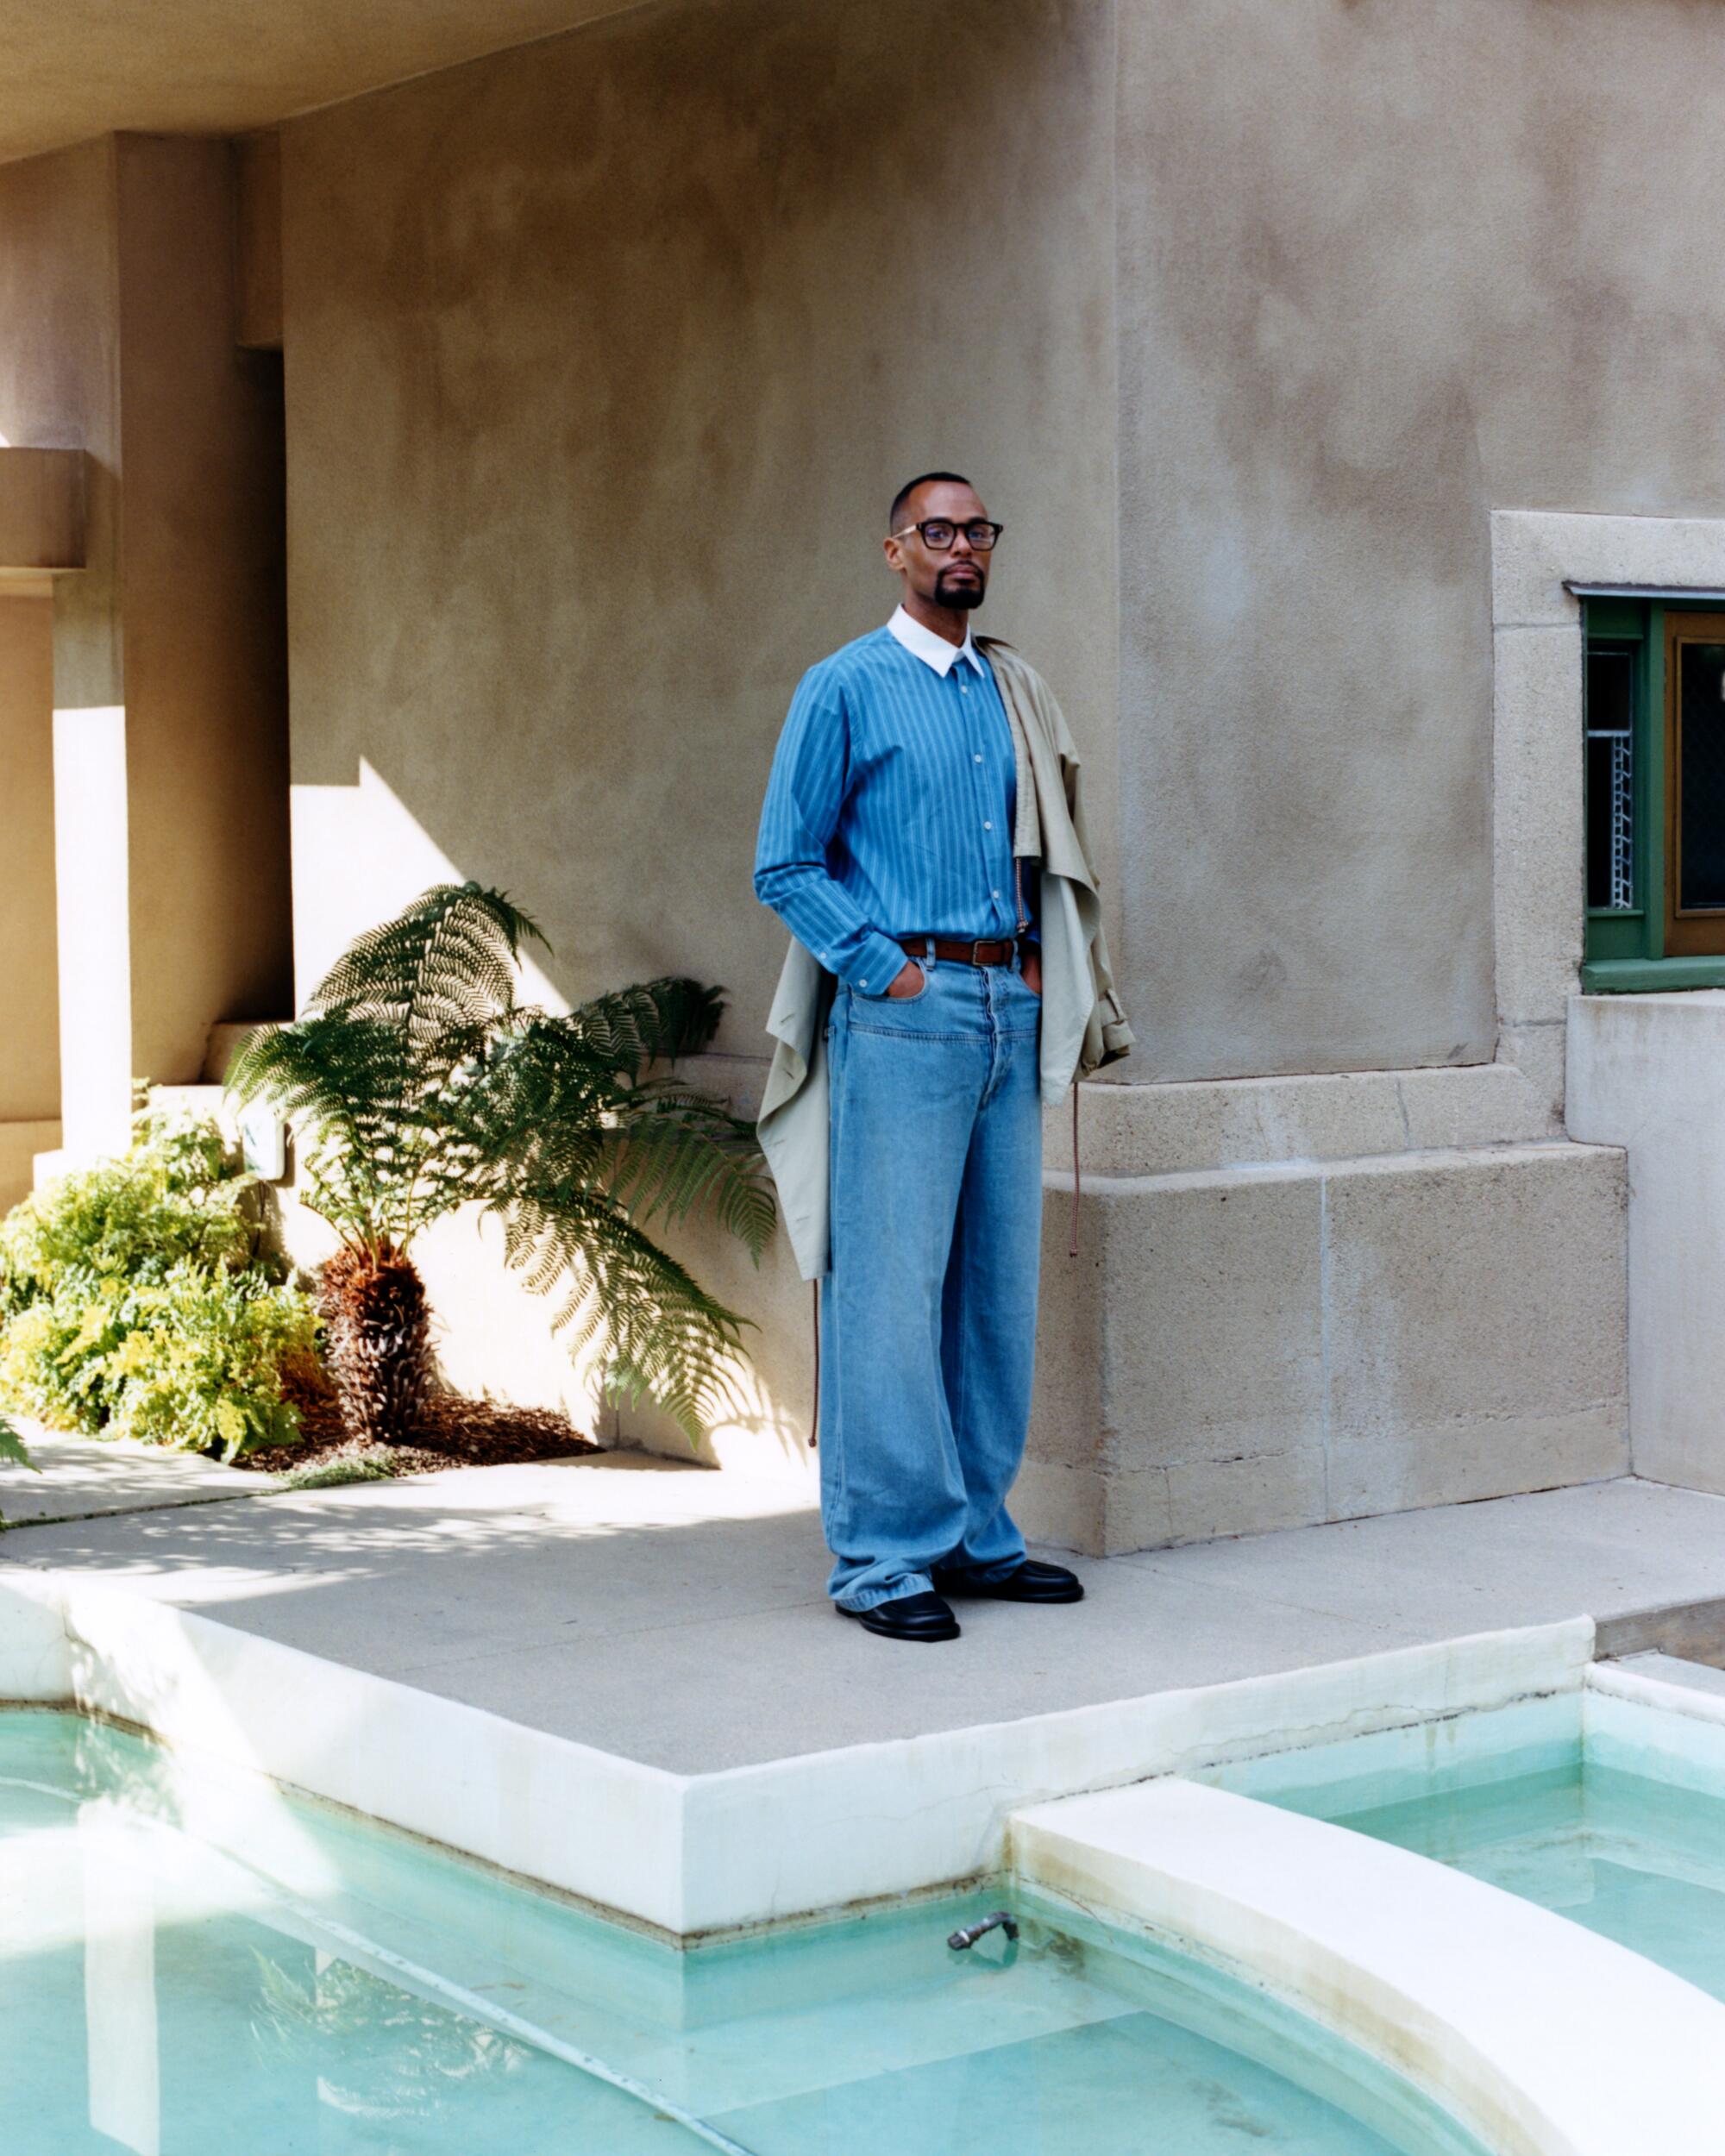 A man in an all-blue outfit stands beside a pond.